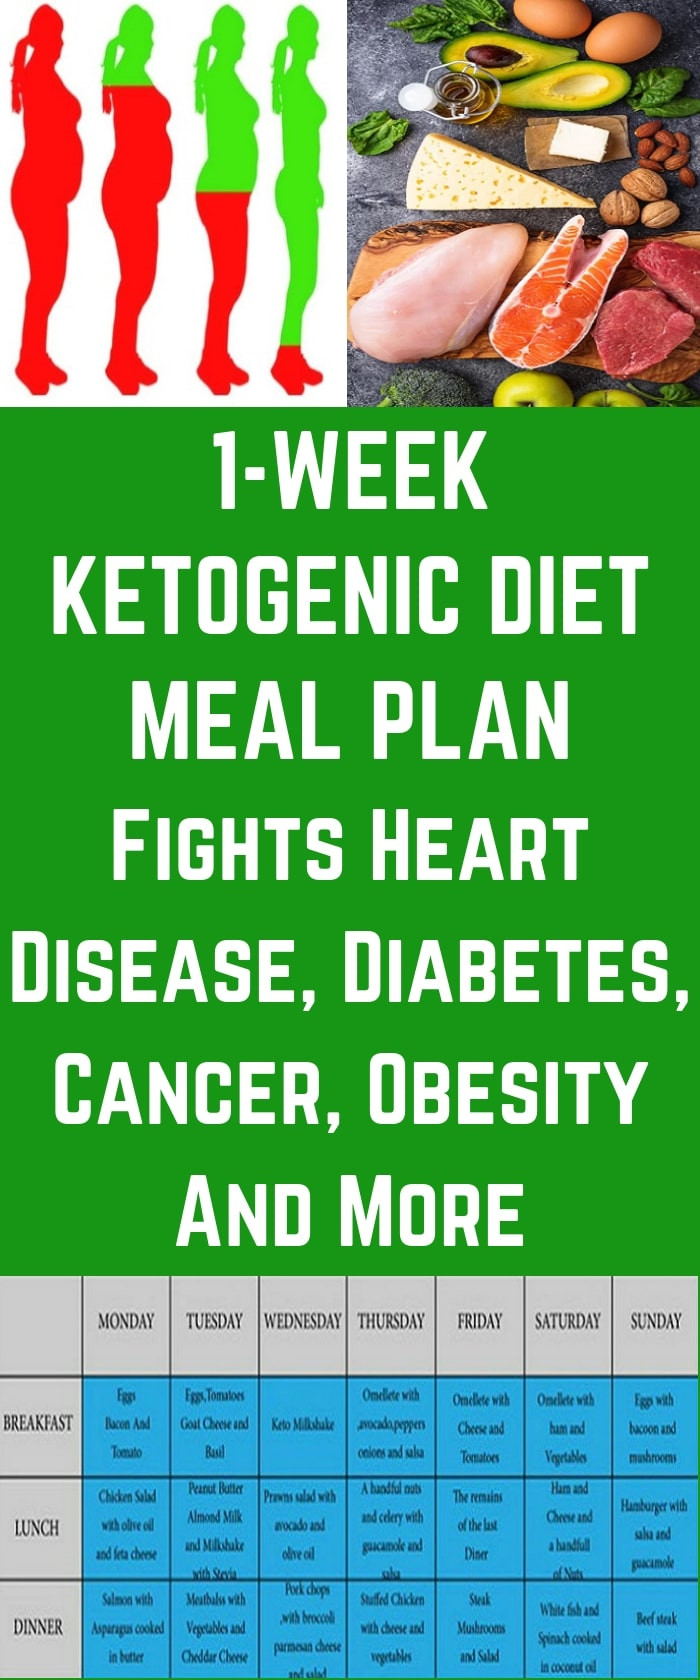 Who Invented The Keto Diet
 1 Week Ketogenic Diet Meal Plan Intended To Fight Heart